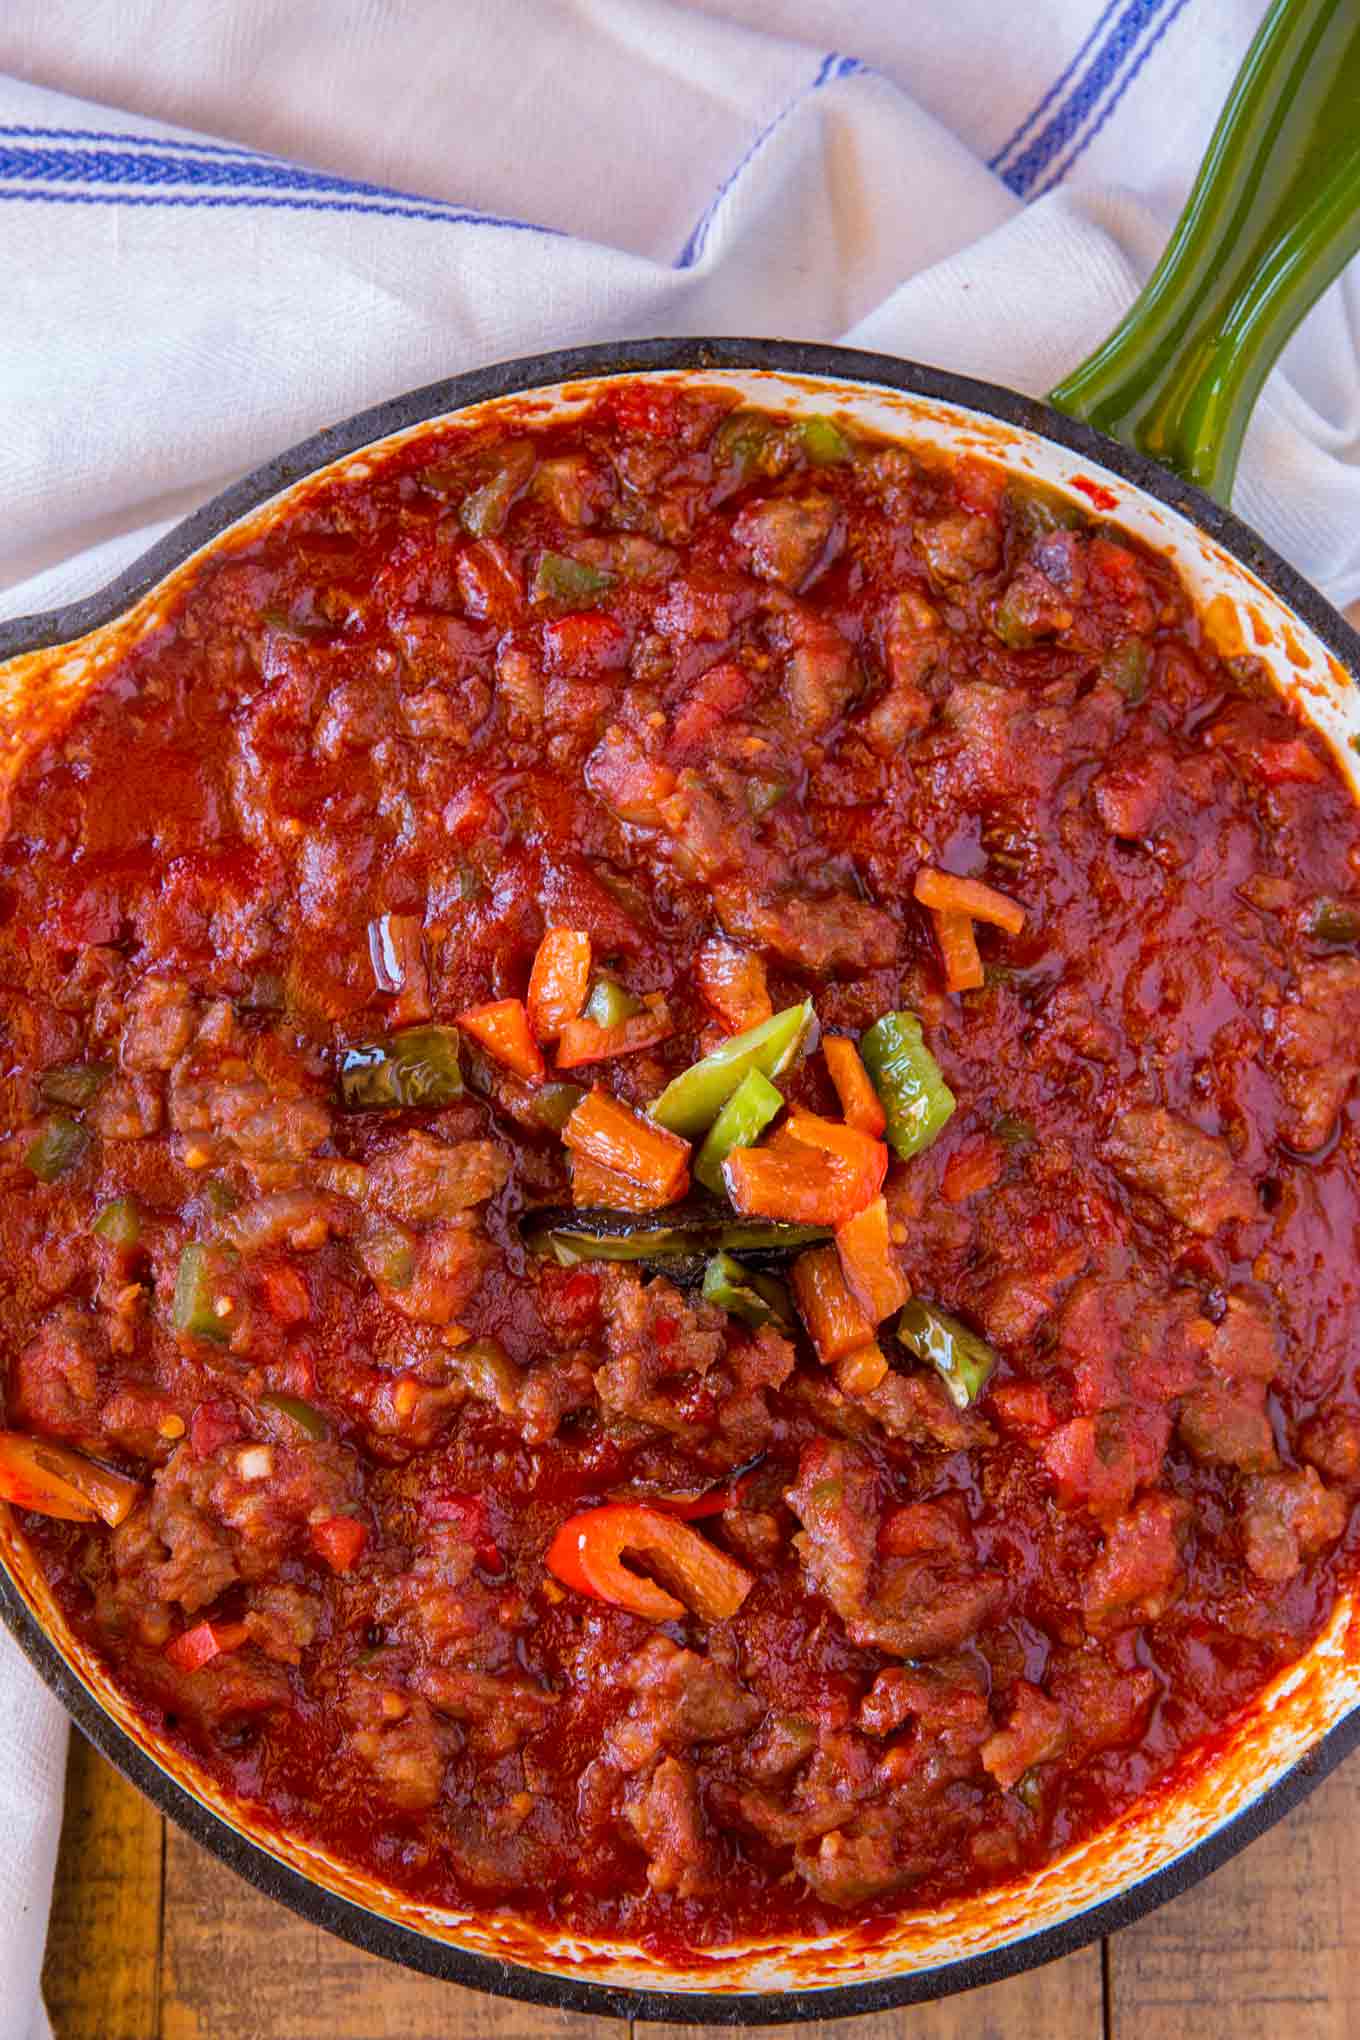 Sausage Sloppy Joes with Bell Peppers